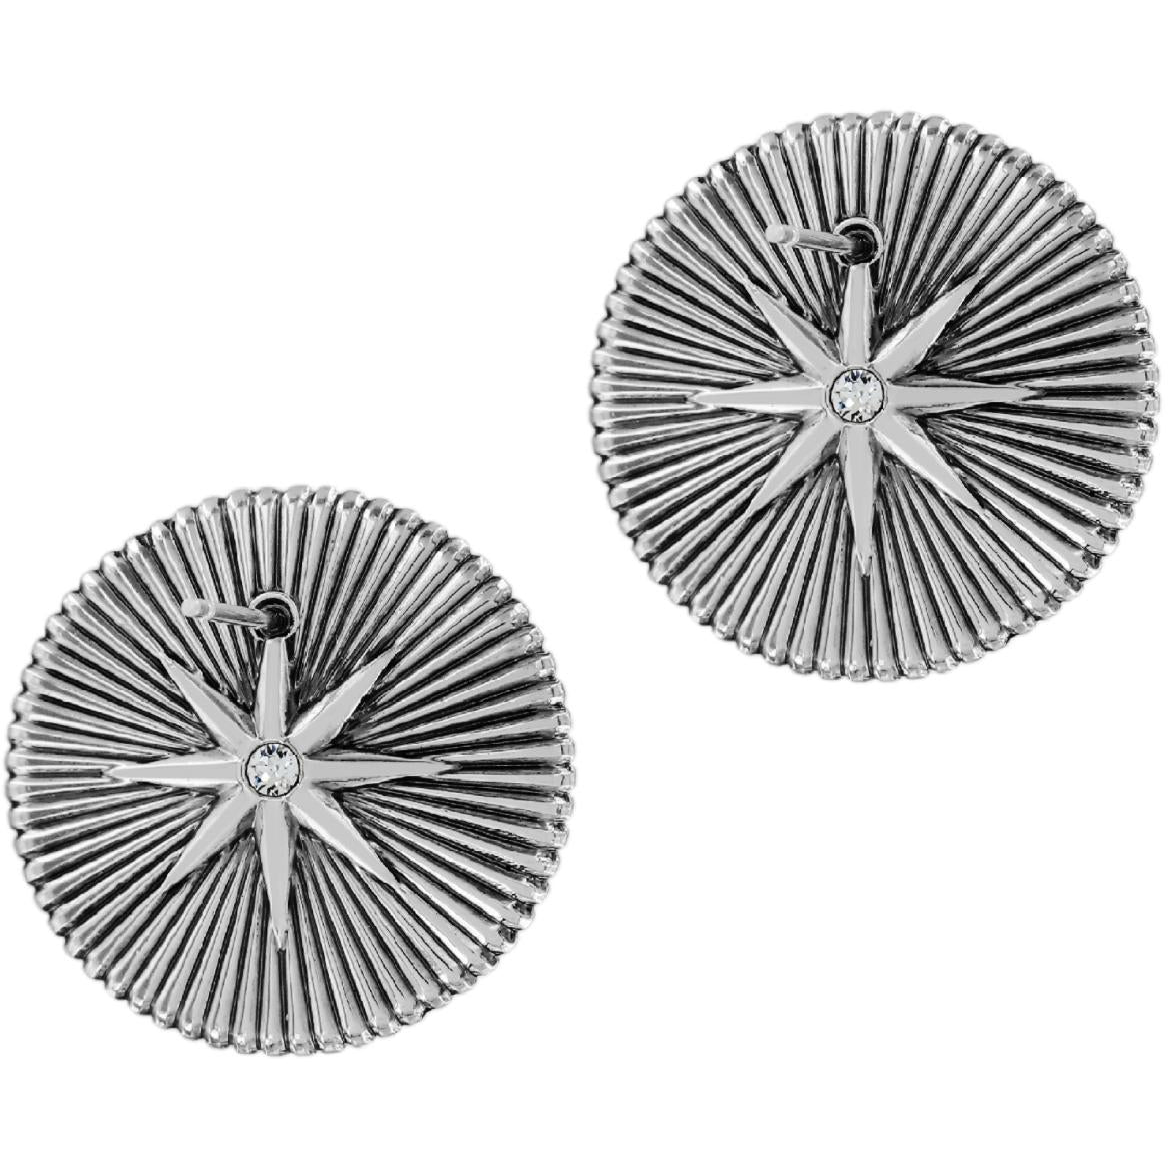 Halo Rays Round Post Earrings - Zinnias Gift Boutique